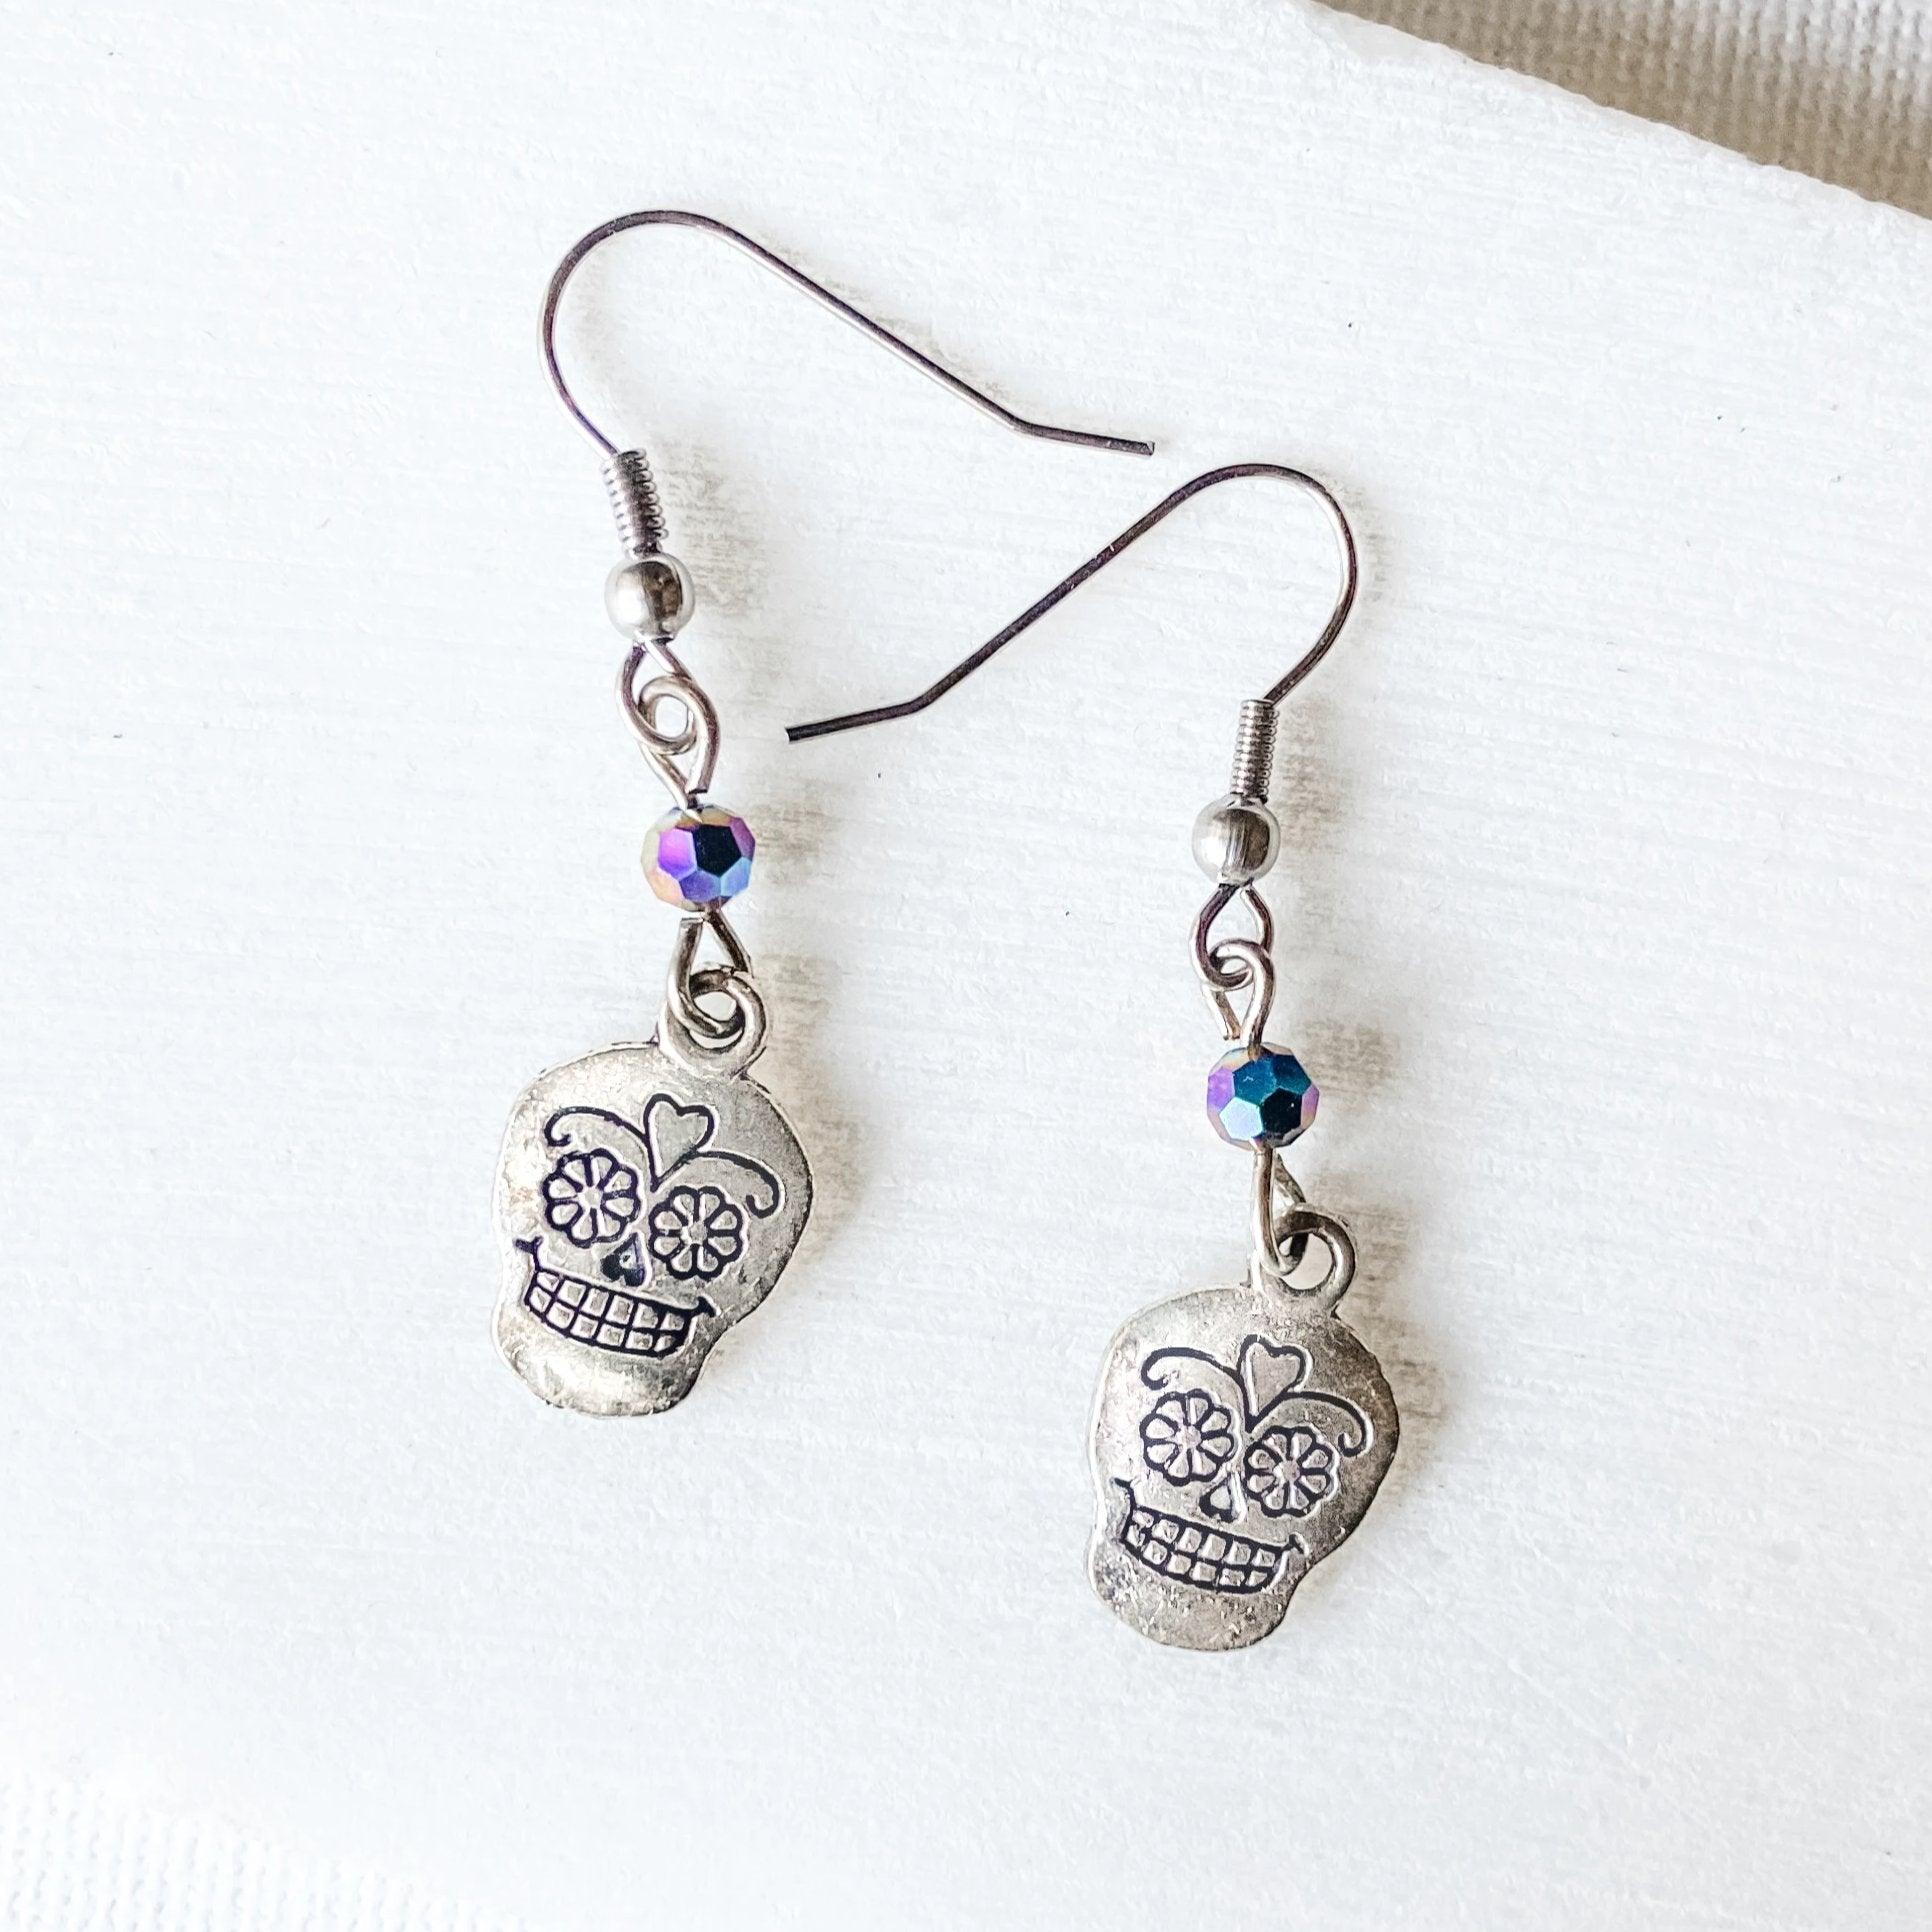 Scull Charm Earrings with Glass Beads Uni-T Earrings